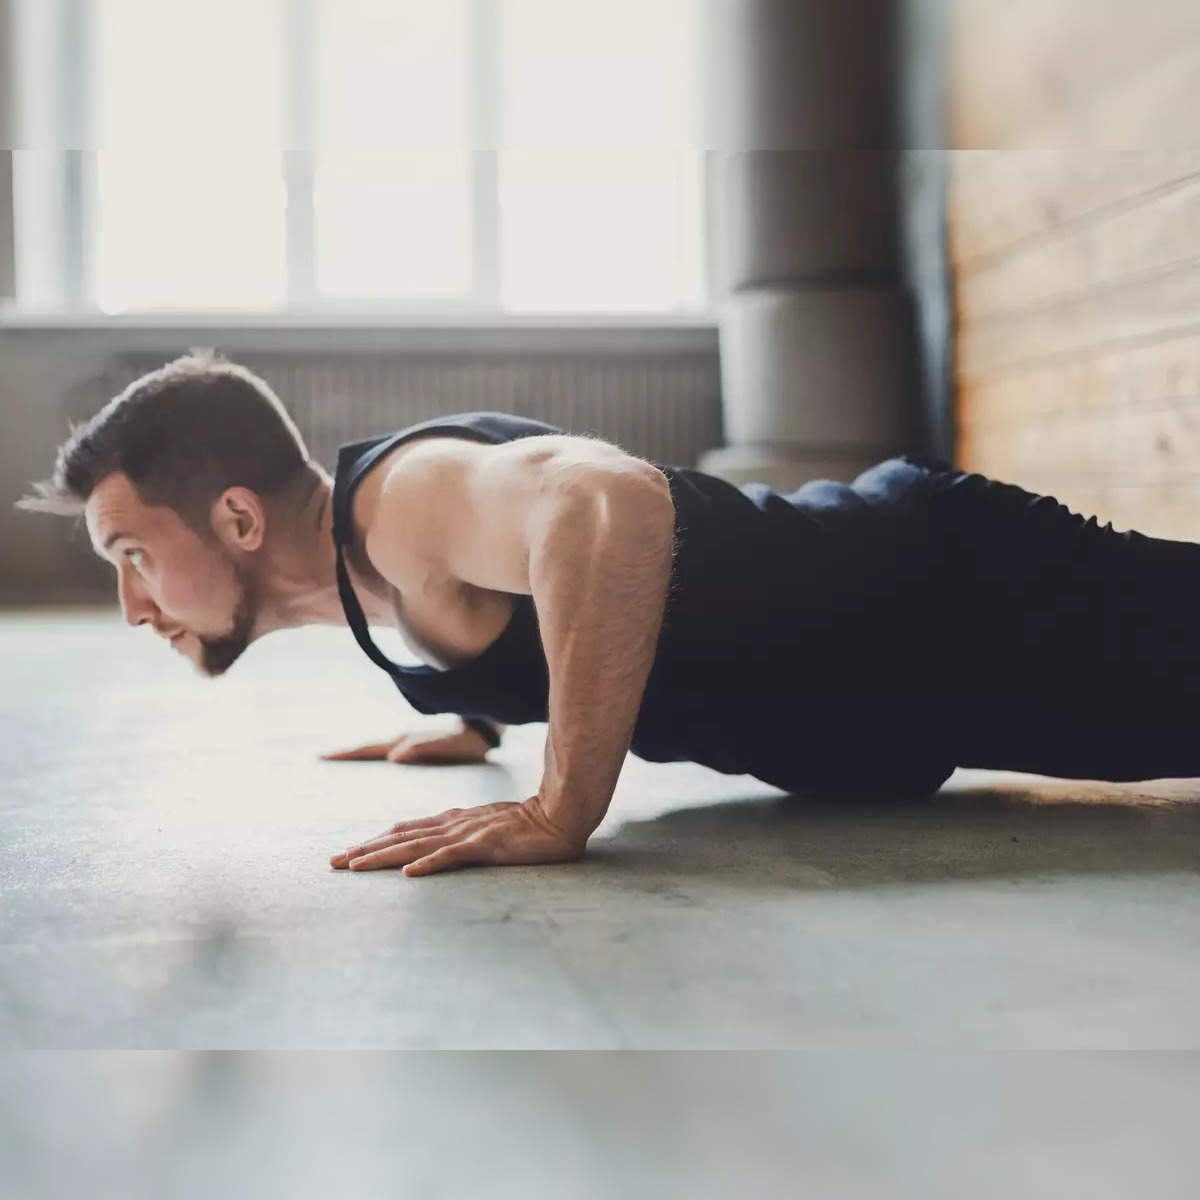 Planks vs push-ups: Know the differences, and which is better for beginners